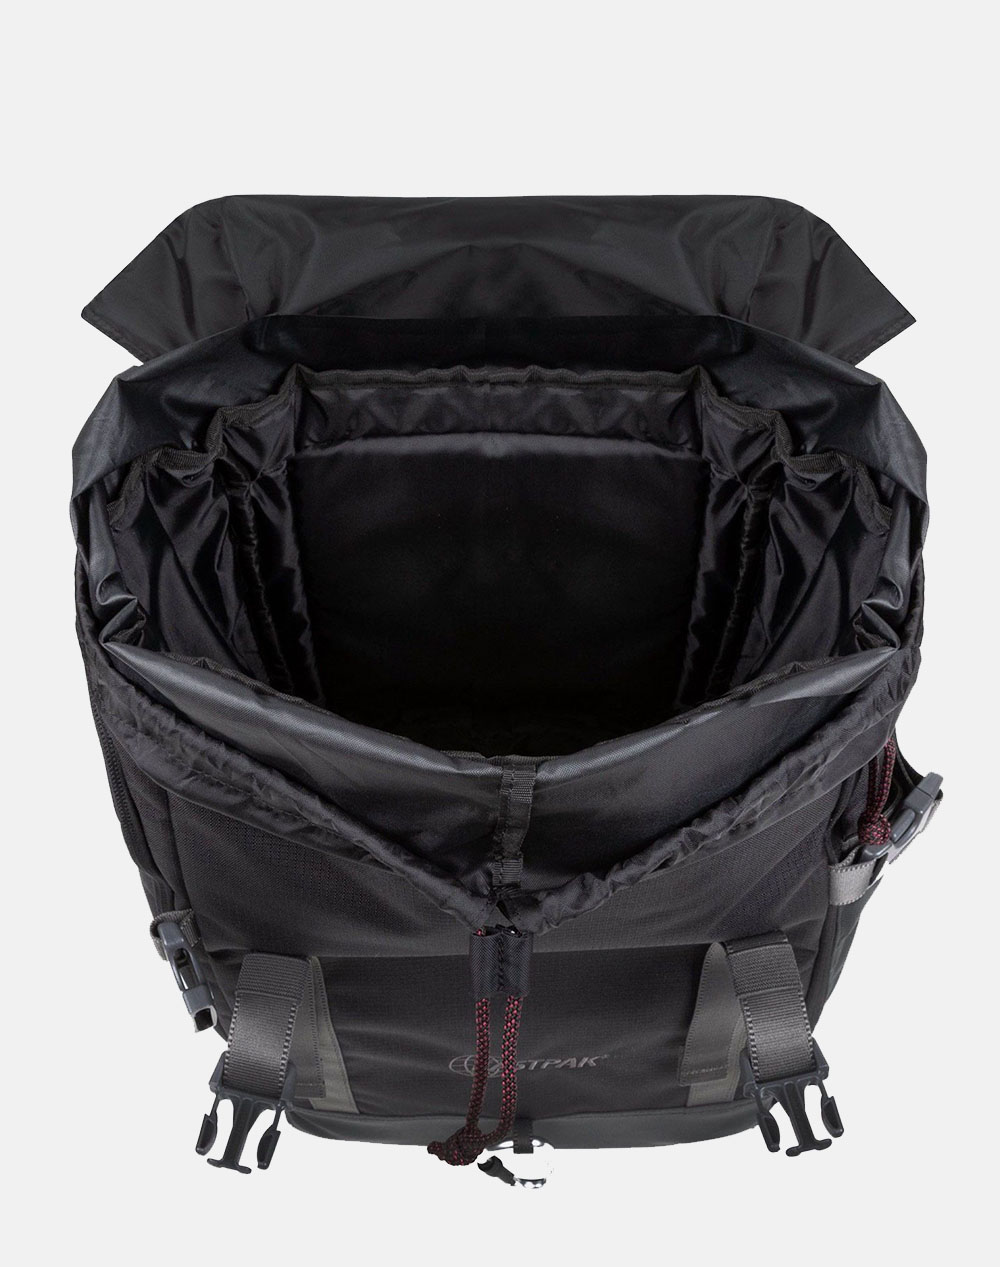 EASTPAK OUT CAMERA PACK (Διαστάσεις: 44 x 29 x 19 εκ)